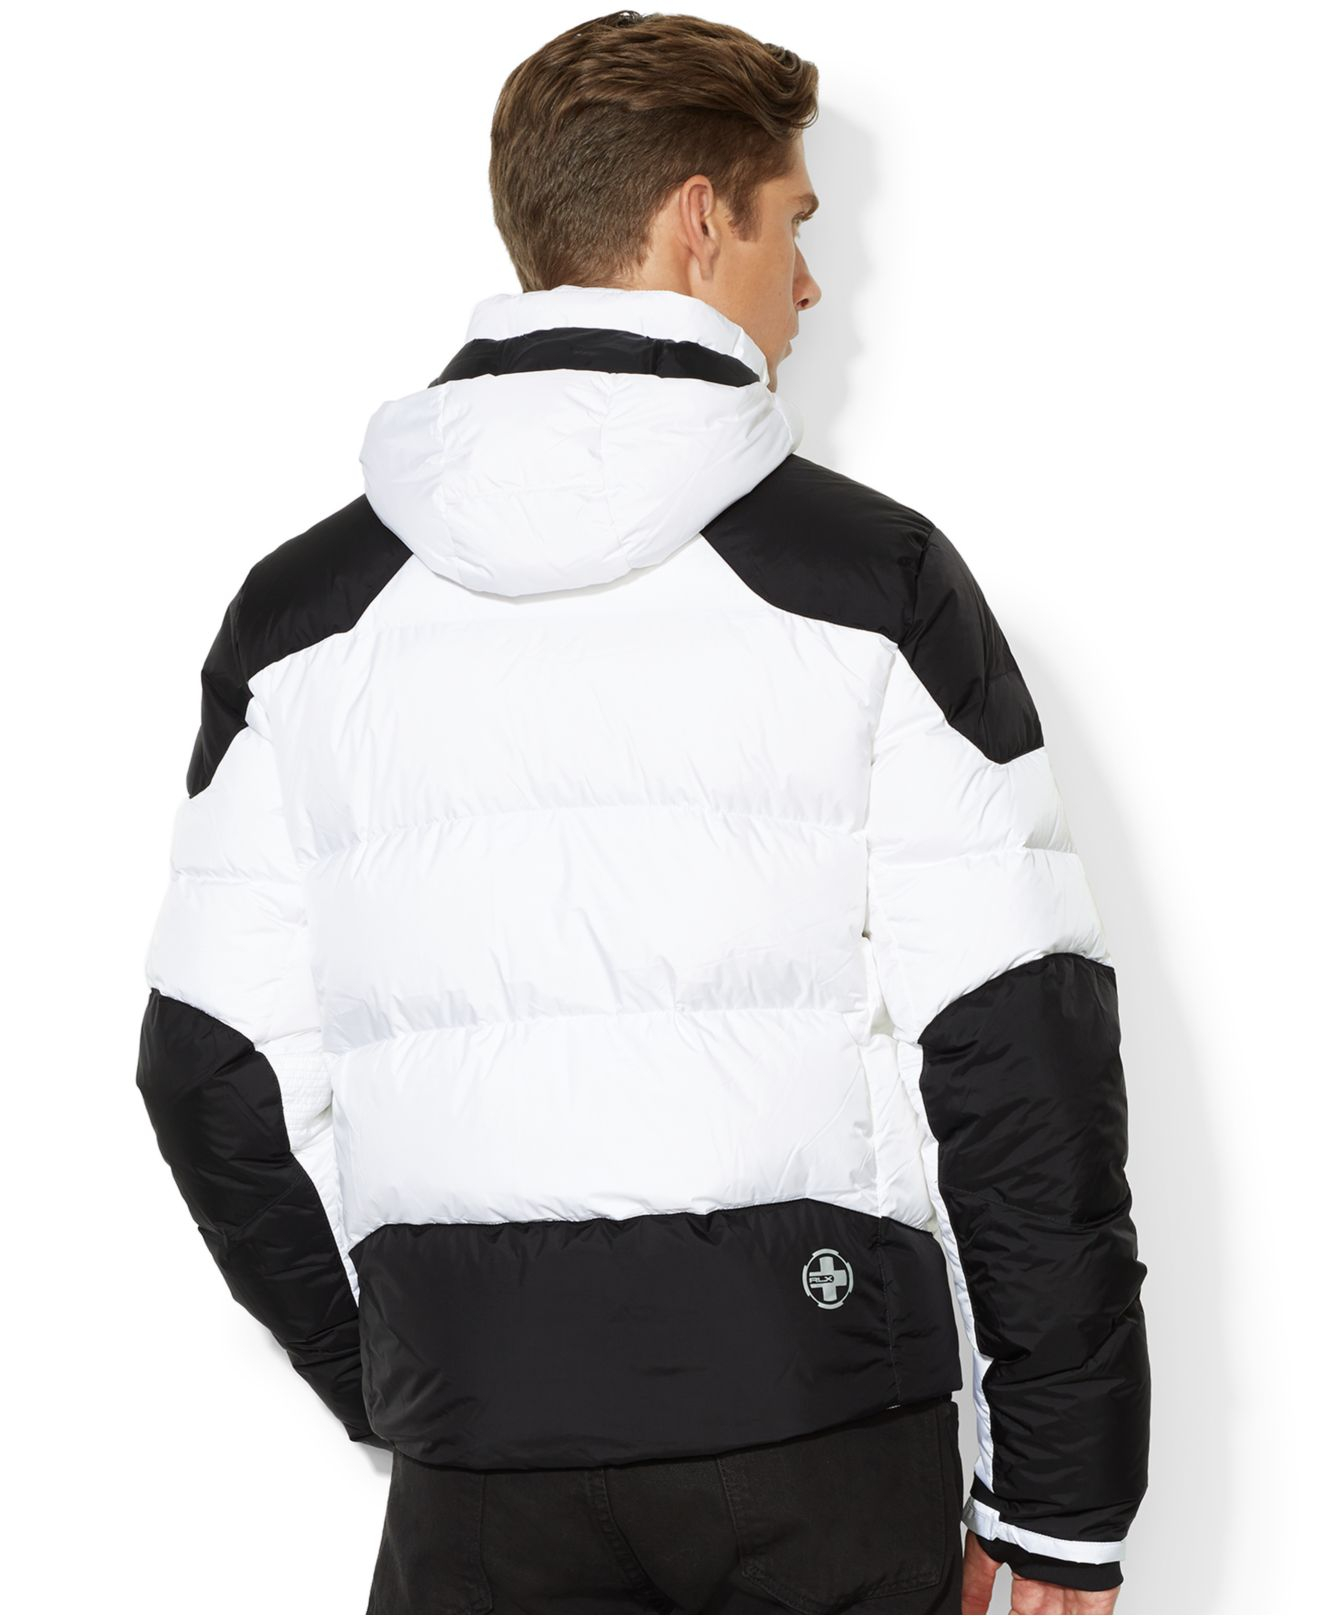 Polo Ralph Lauren Rlx Quilted Down Jacket in White for Men - Lyst